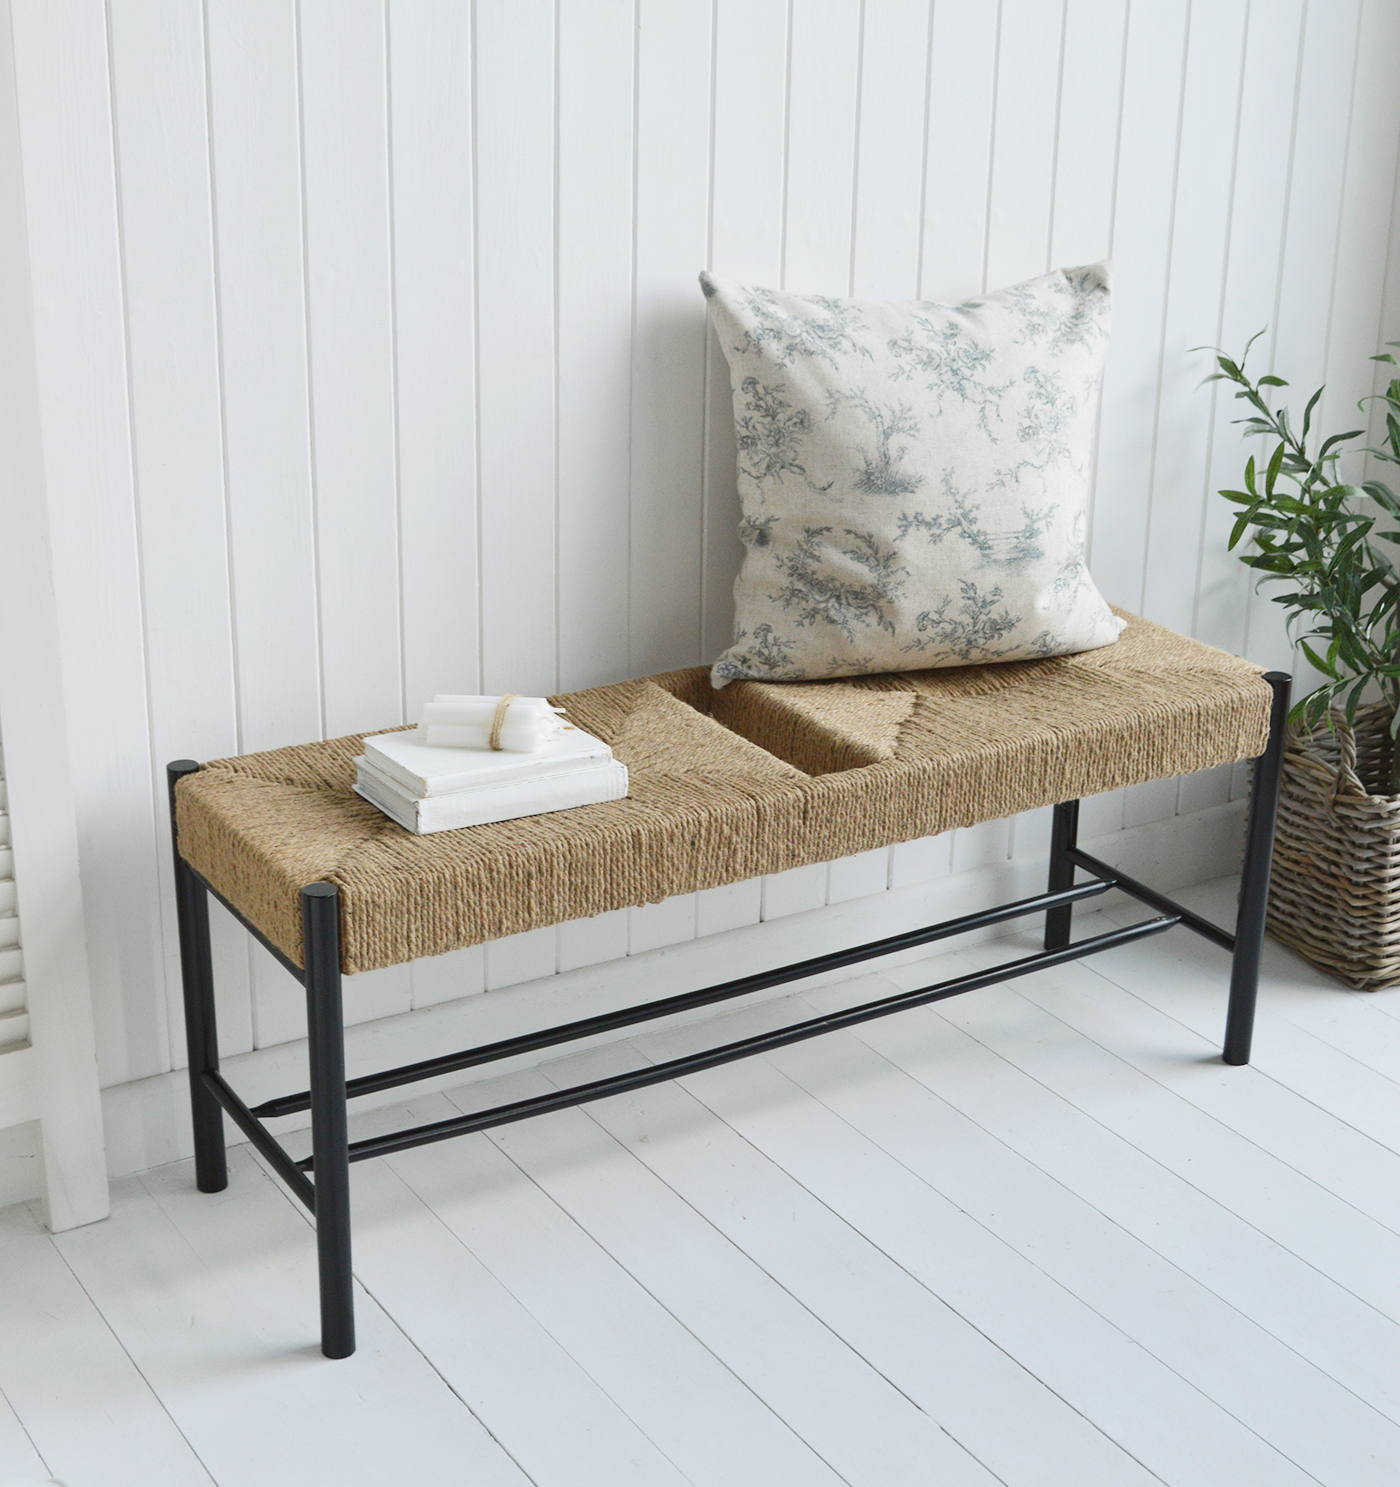 The black Wakefield bench furniture in a white room in a modern farmhouse style interiors to create a striking and contemporary aesthetic